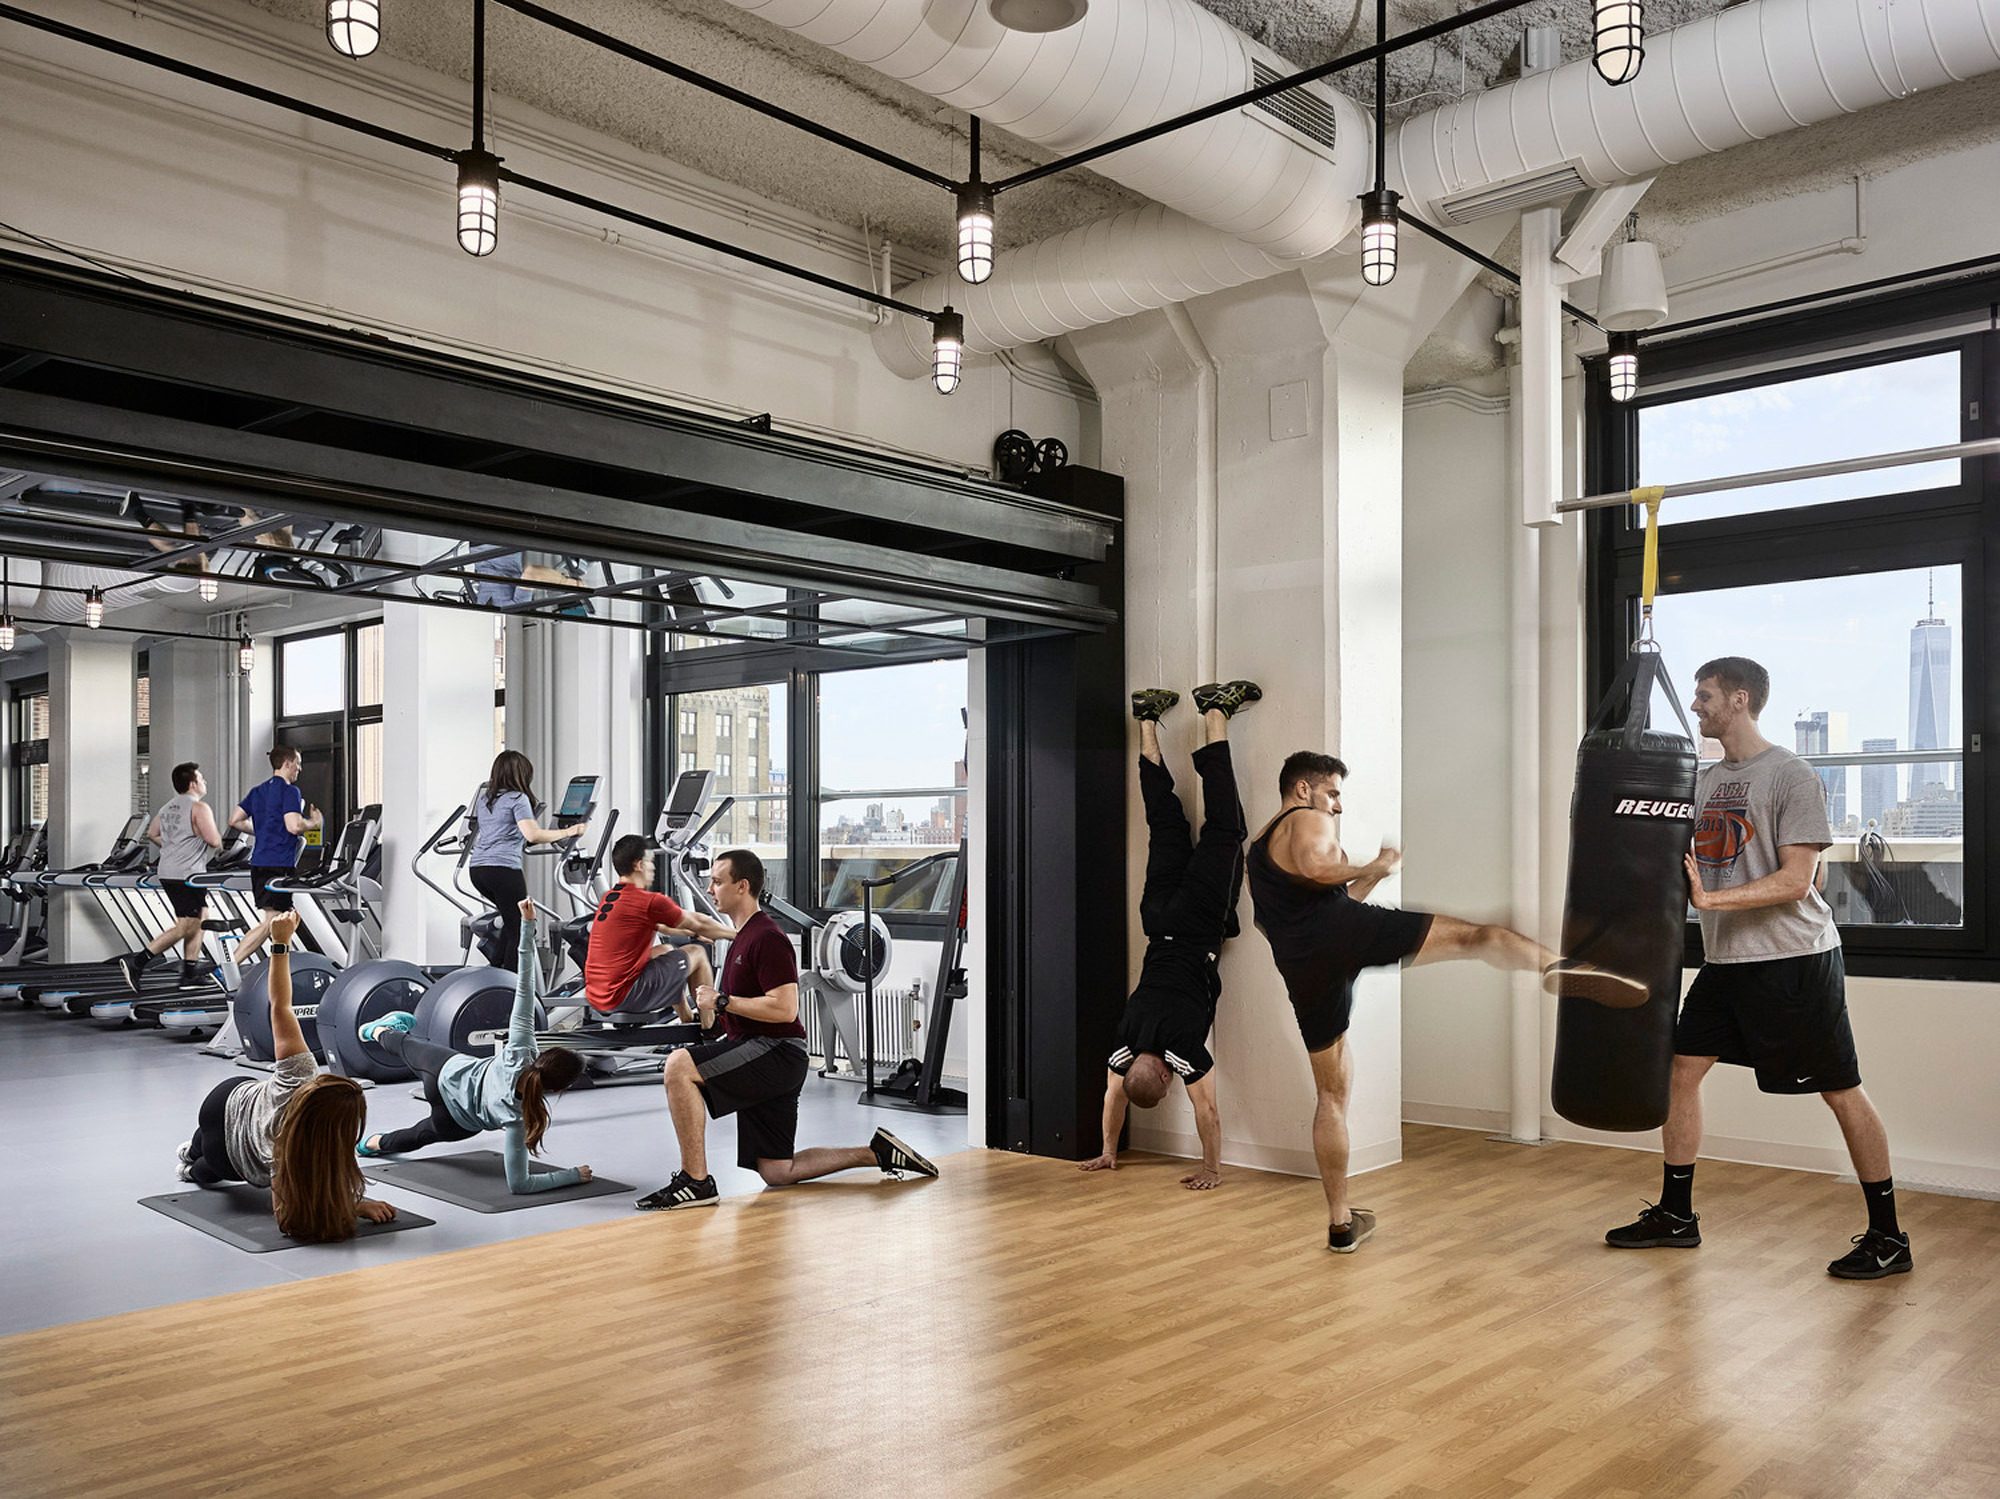 Modern fitness center showcasing expansive floor-to-ceiling windows with city views, exposed ductwork for an industrial aesthetic, and a variety of exercise equipment for cardio and strength training. Several individuals are engaged in workout activities, creating a dynamic and energetic atmosphere.